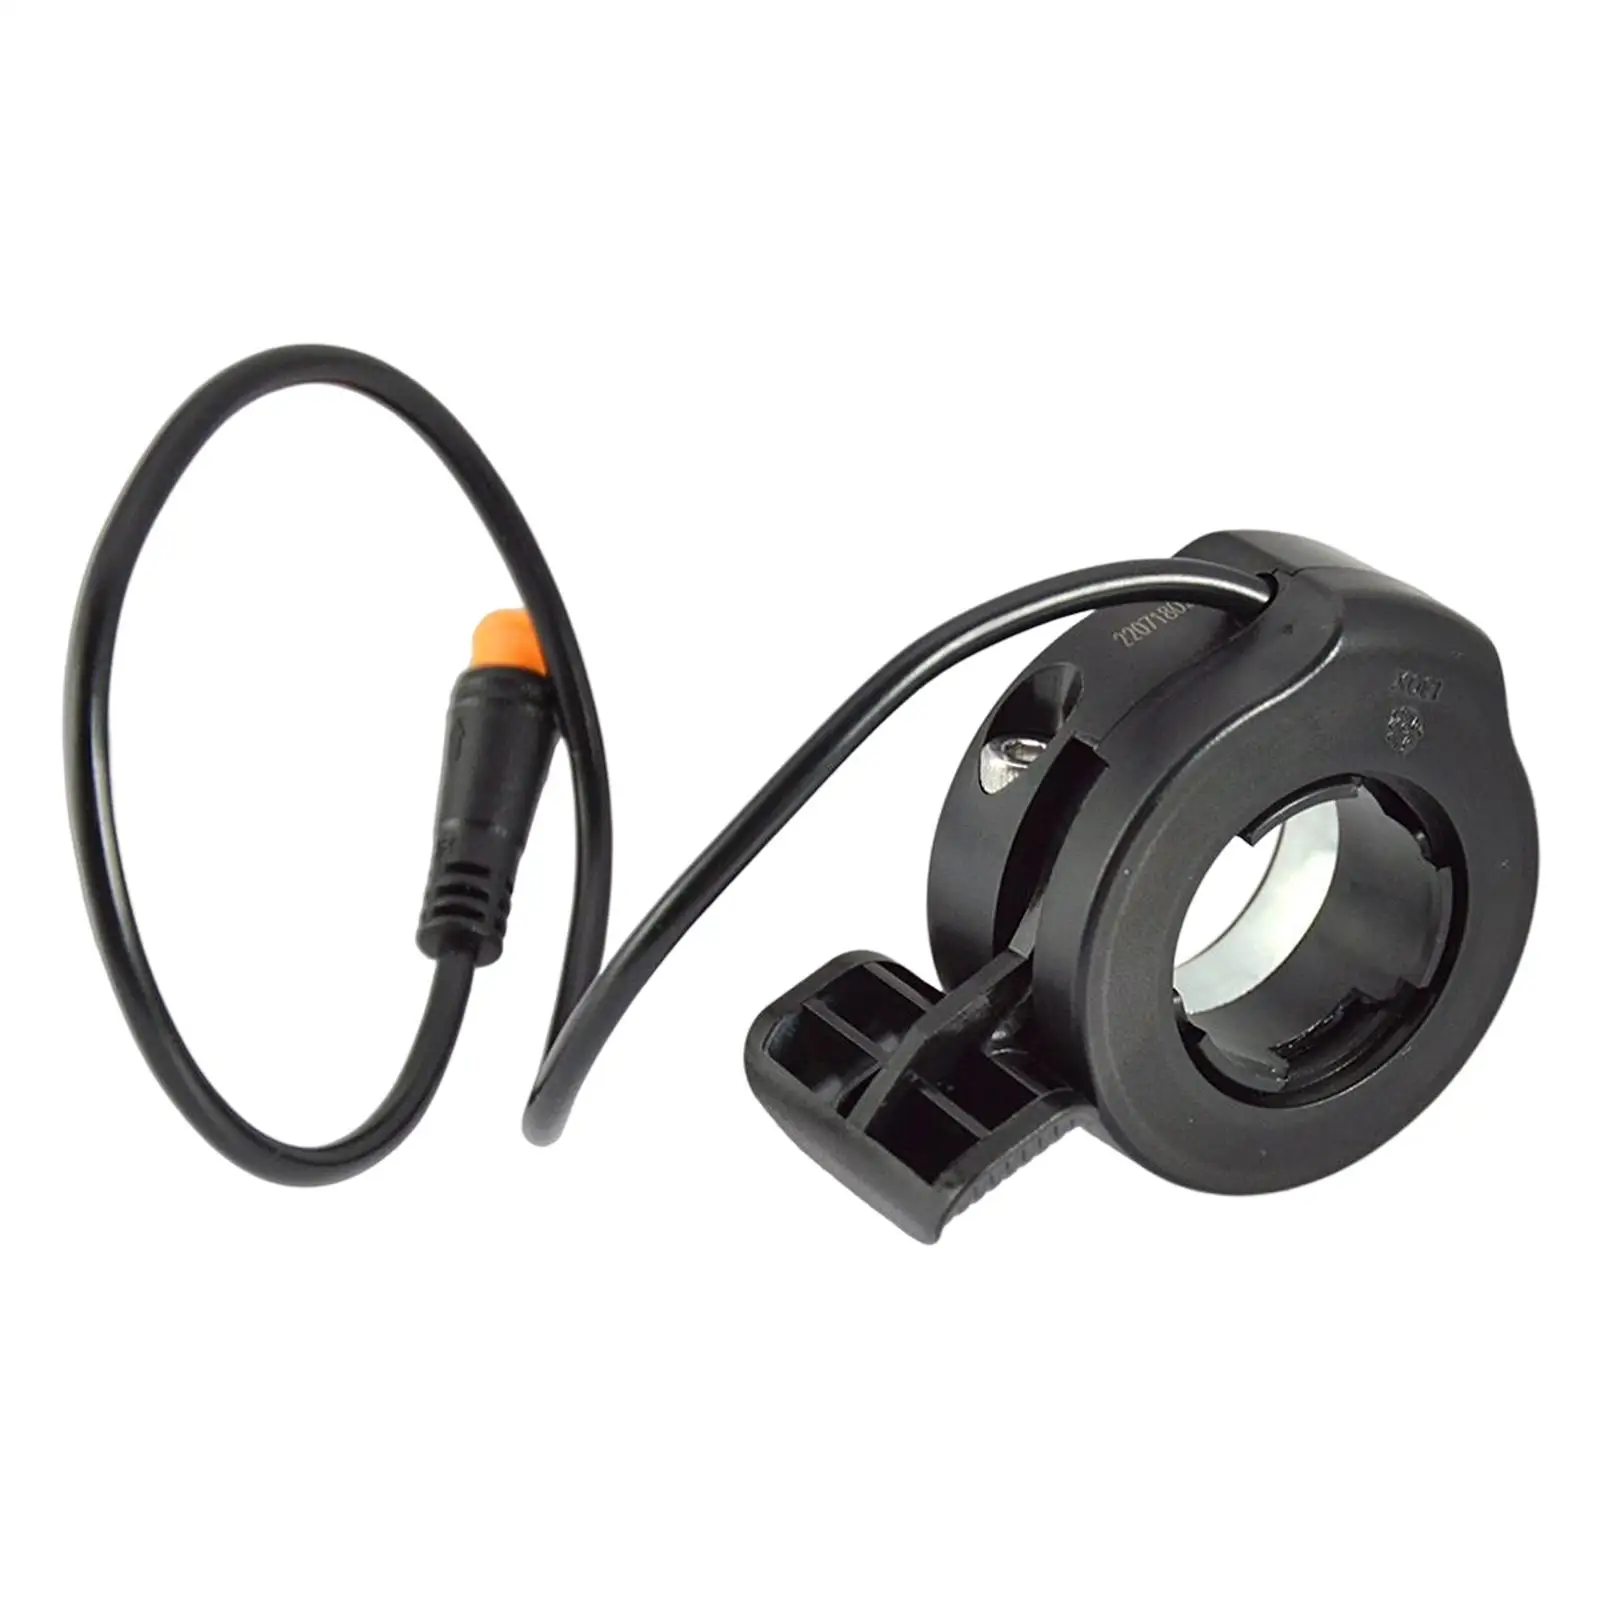 Electric  Thumb Throttle Left Right Universal Speed Controller Durable Finger Throttle Scooter Accessory